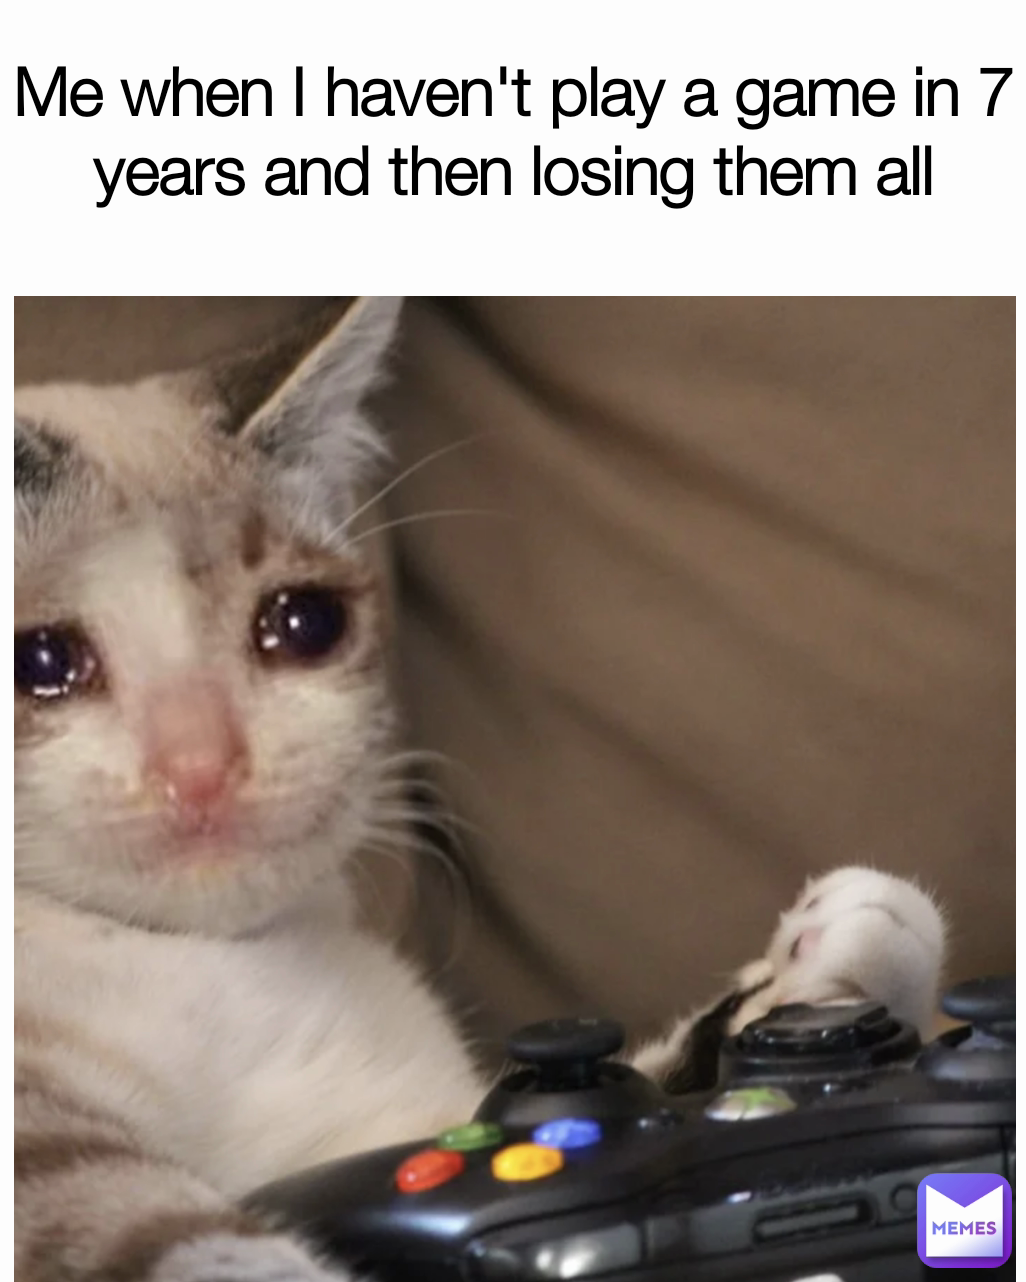 Me when I haven't play a game in 7 years and then losing them all